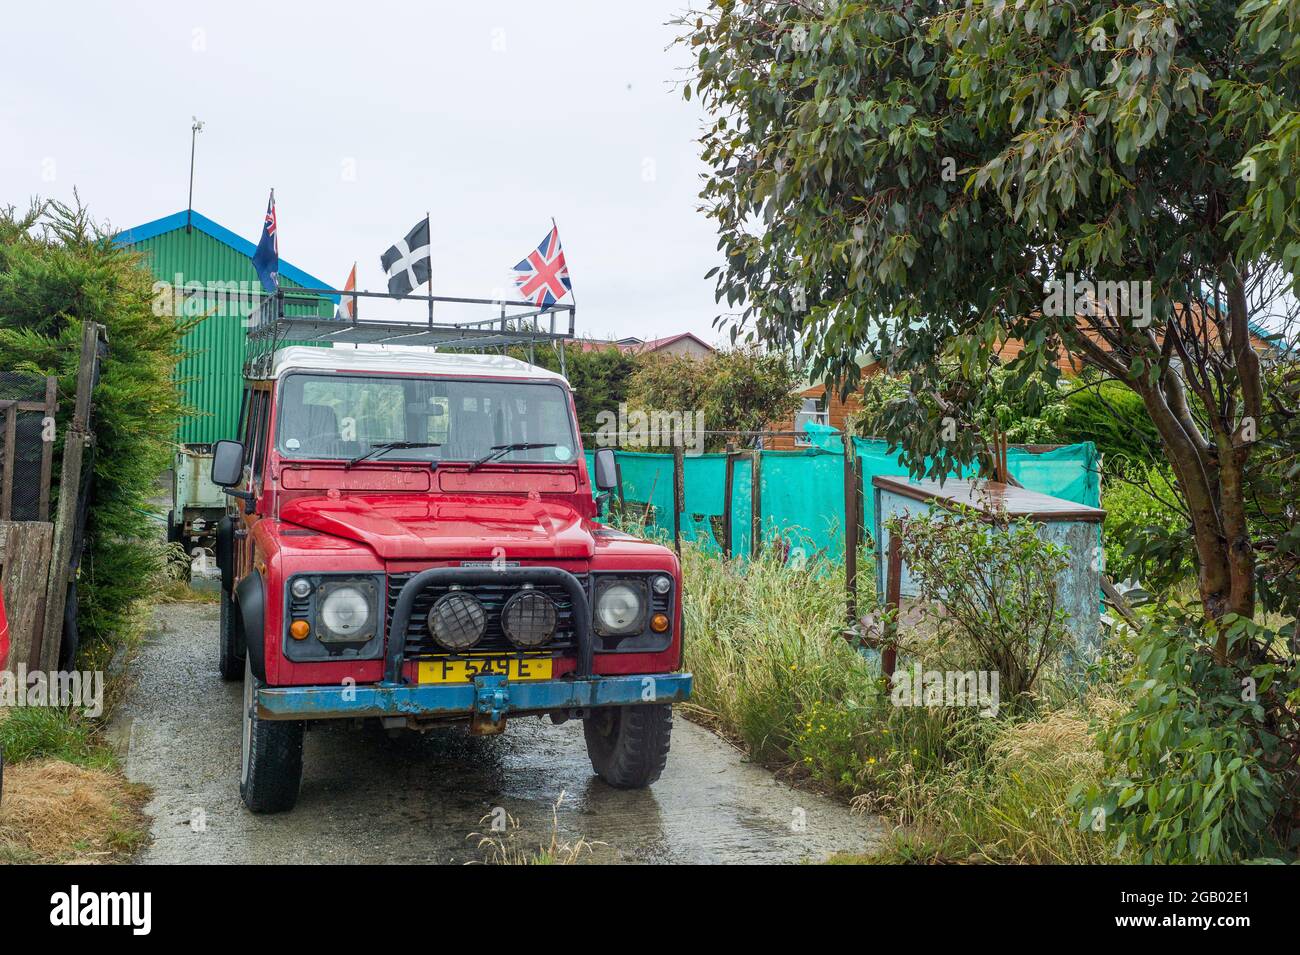 Land Rover Defender Port Stanley Falkland Islands flying various British and Island flags Stock Photo